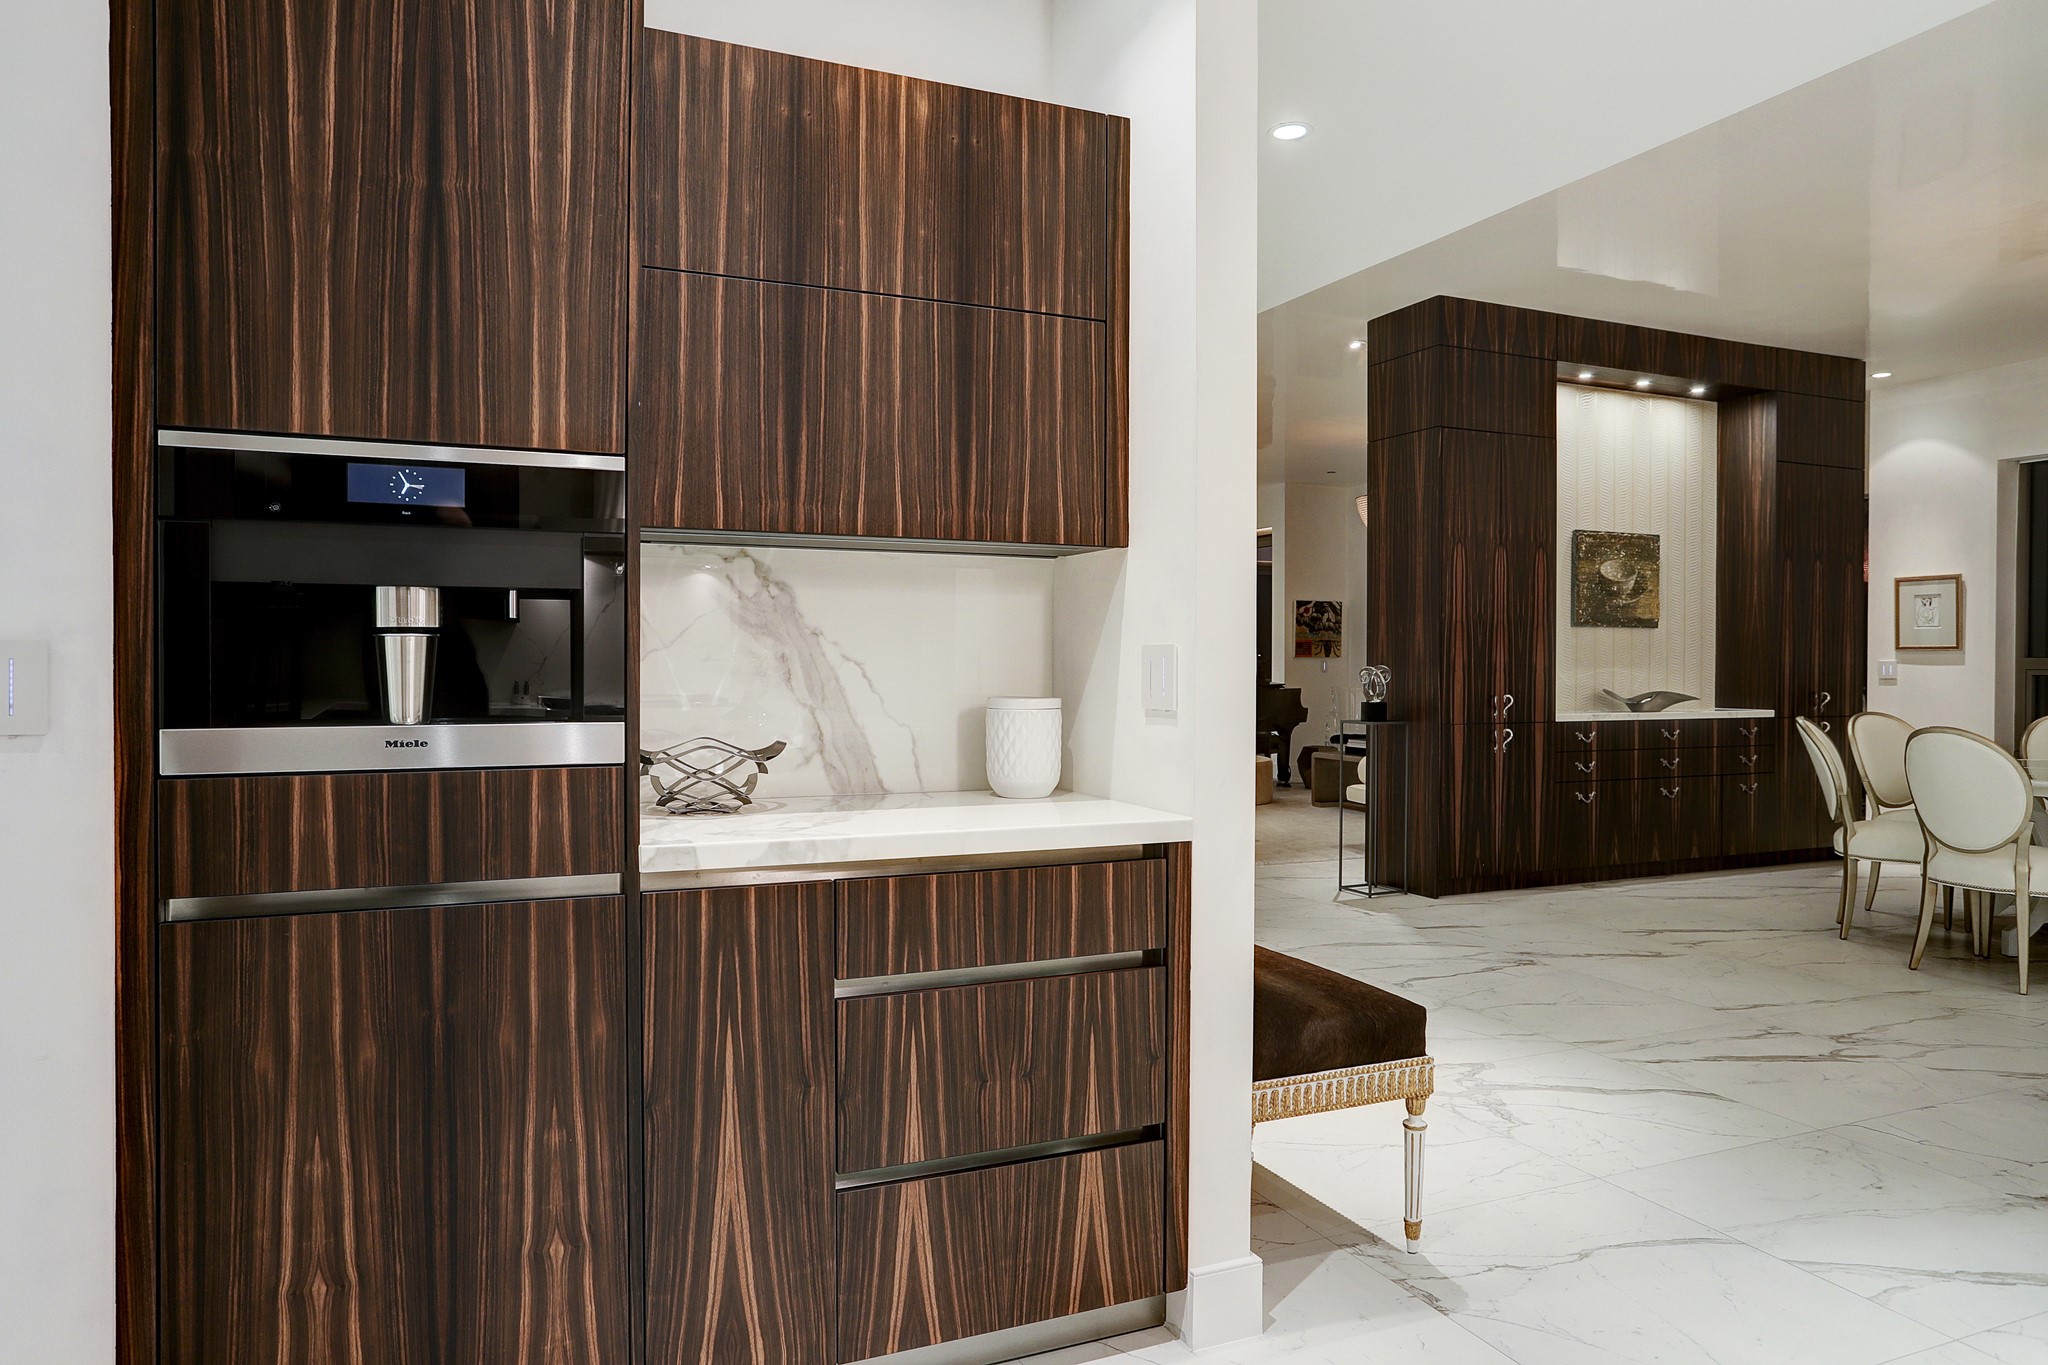 The Kitchen also features a built-in Miele coffee machine with additional built-in counter and storage.